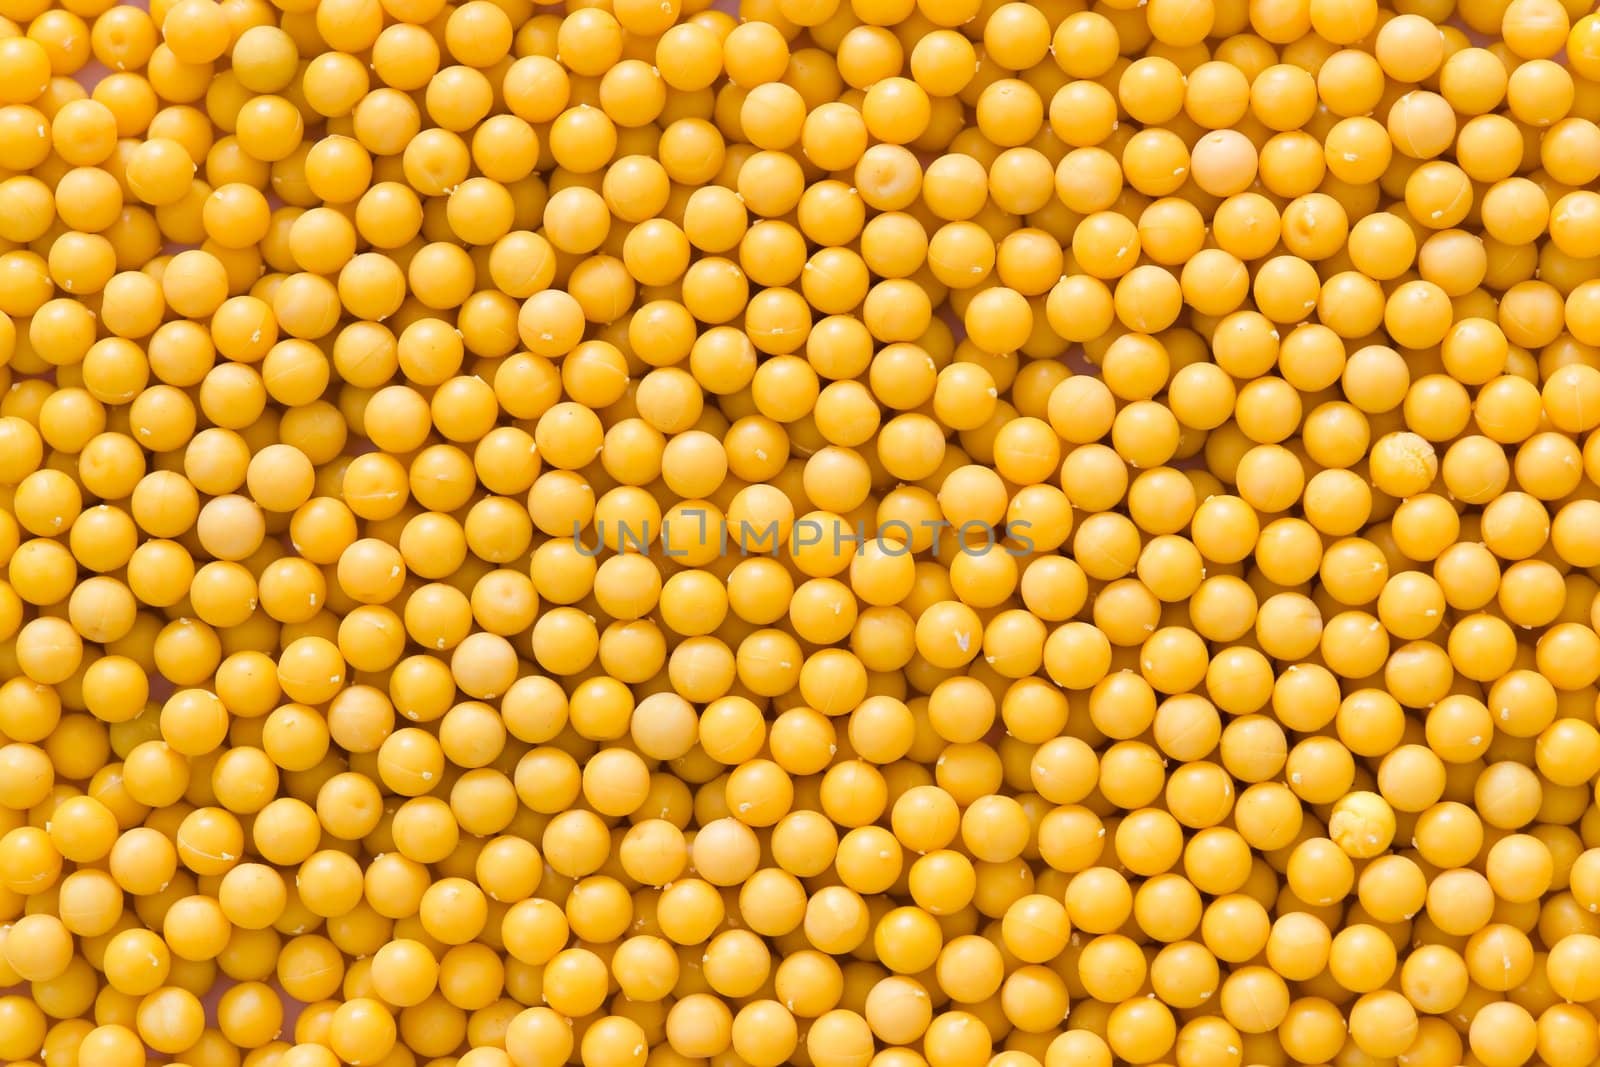 Many small yellow balls. good for background